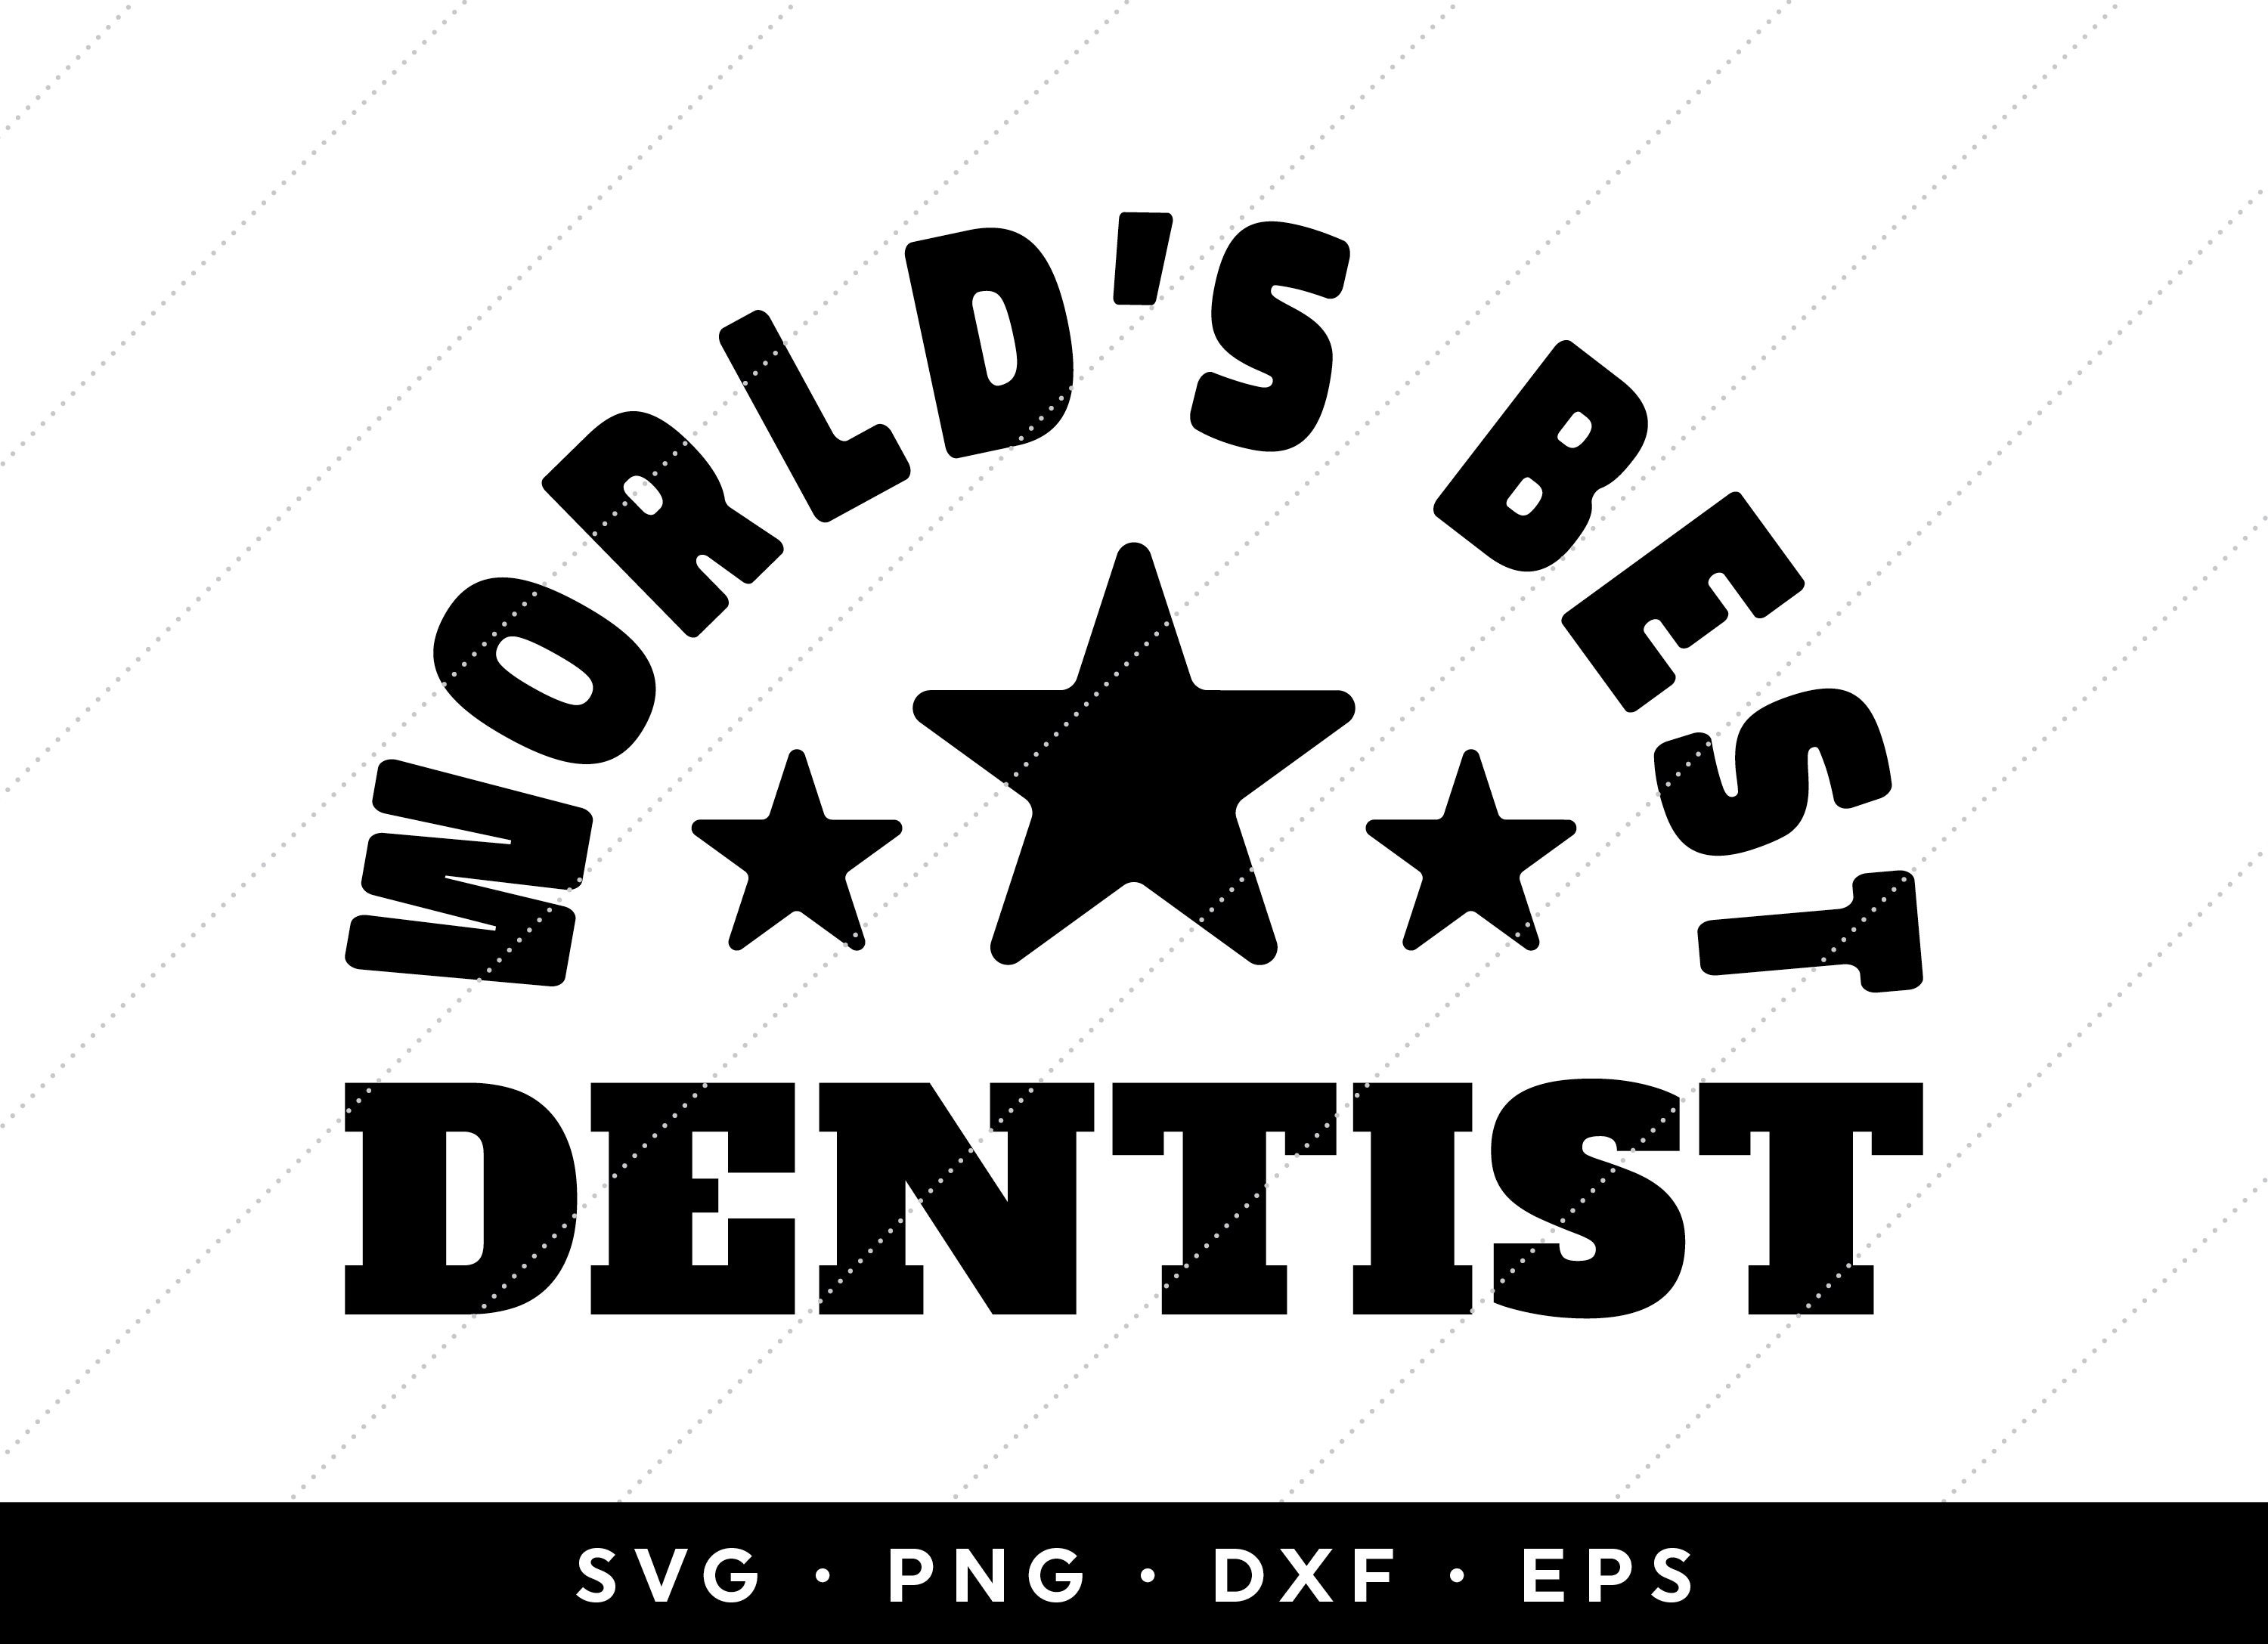 Dentist Tool SVG, Dentist Tool Svg, Dentist Svg, Dentist Tools Svg,  Clipart, Files for Cricut, Cut Files For Silhouette, Dxf, Png, Eps